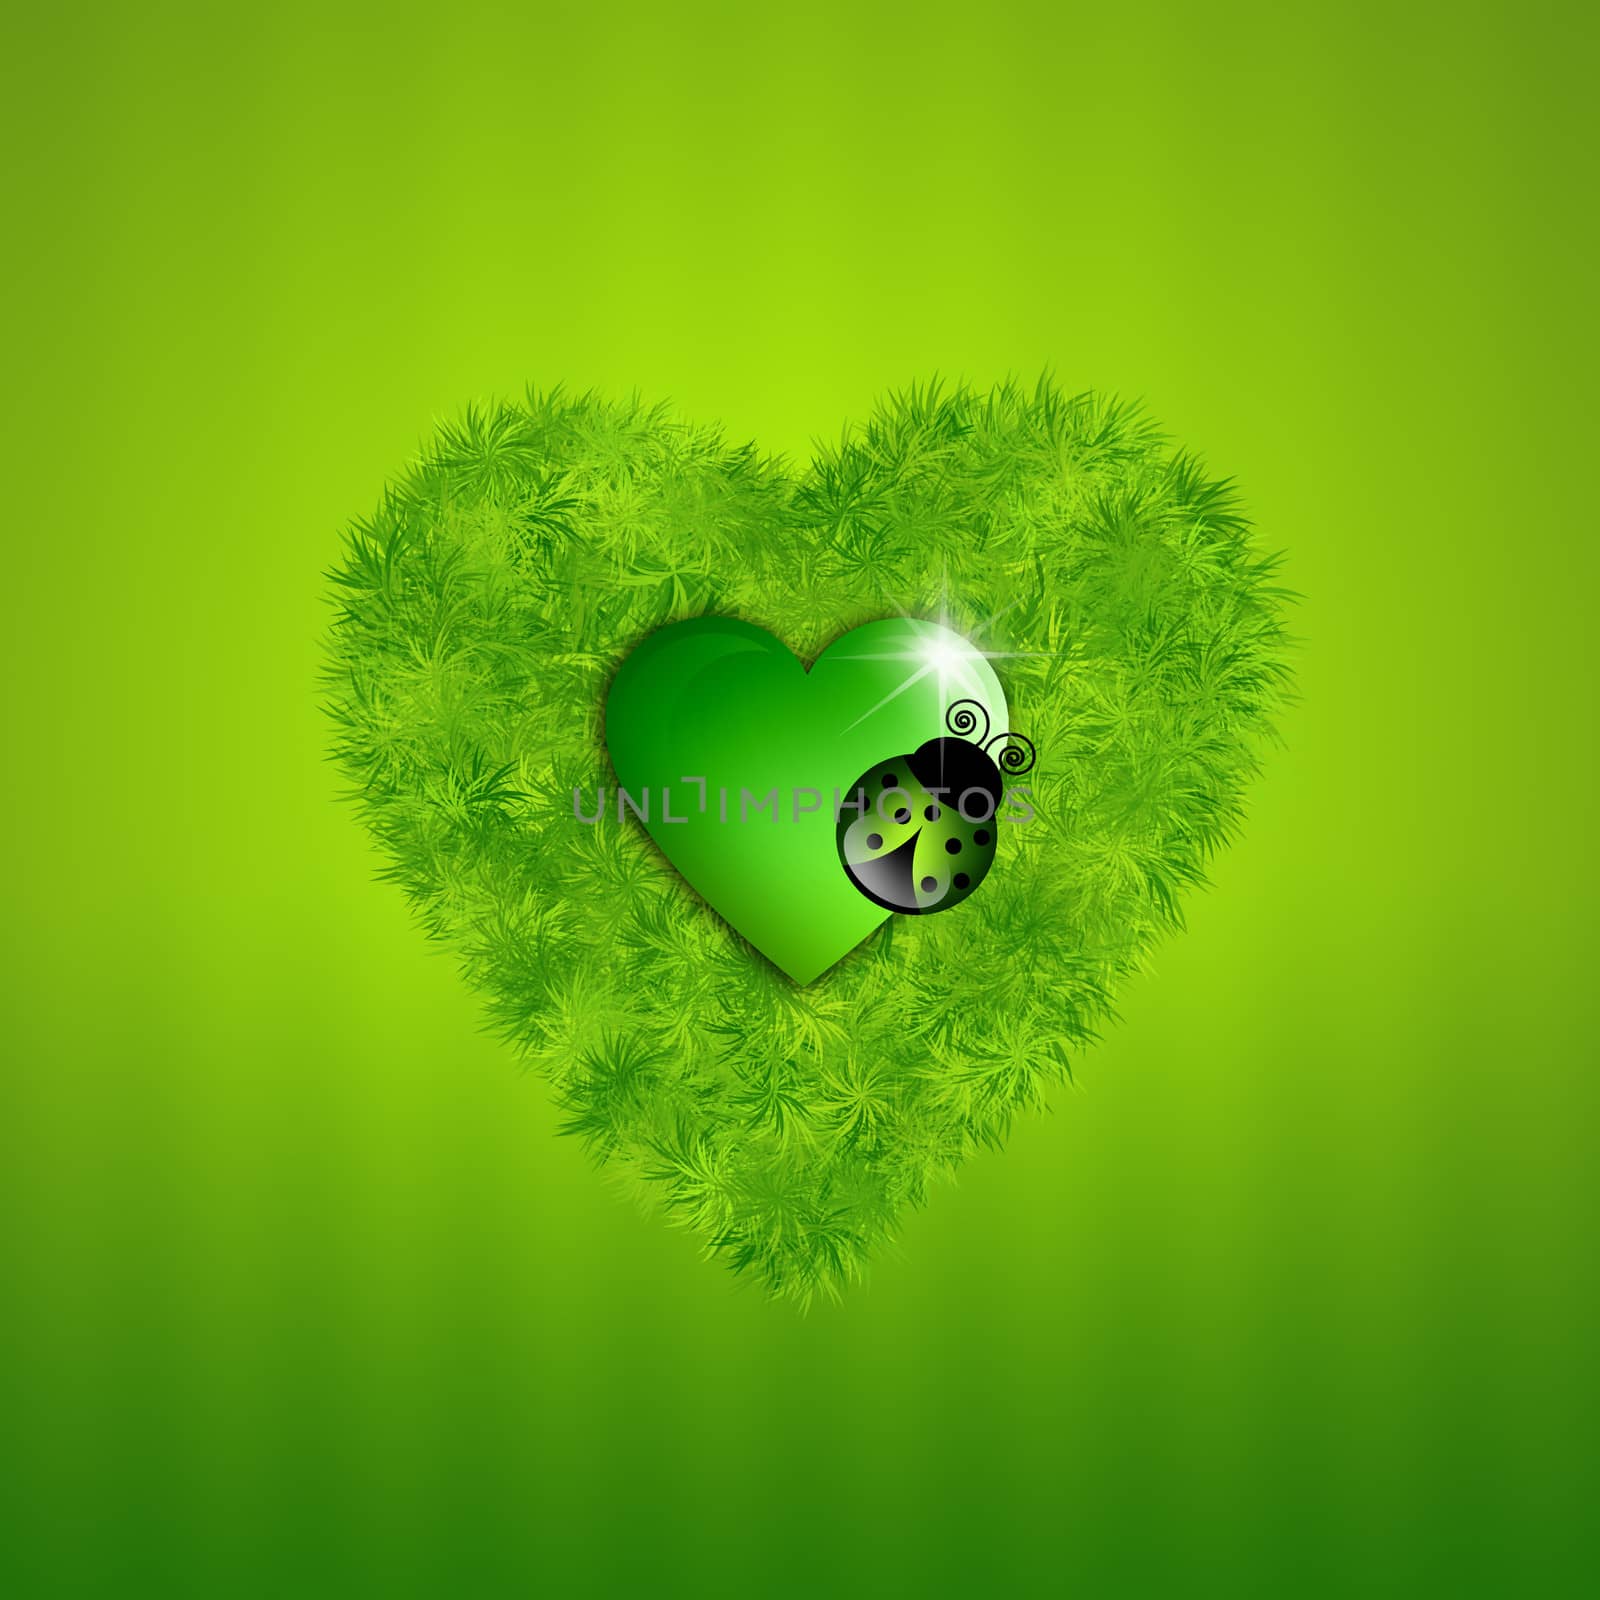 green heart for ecology by sognolucido